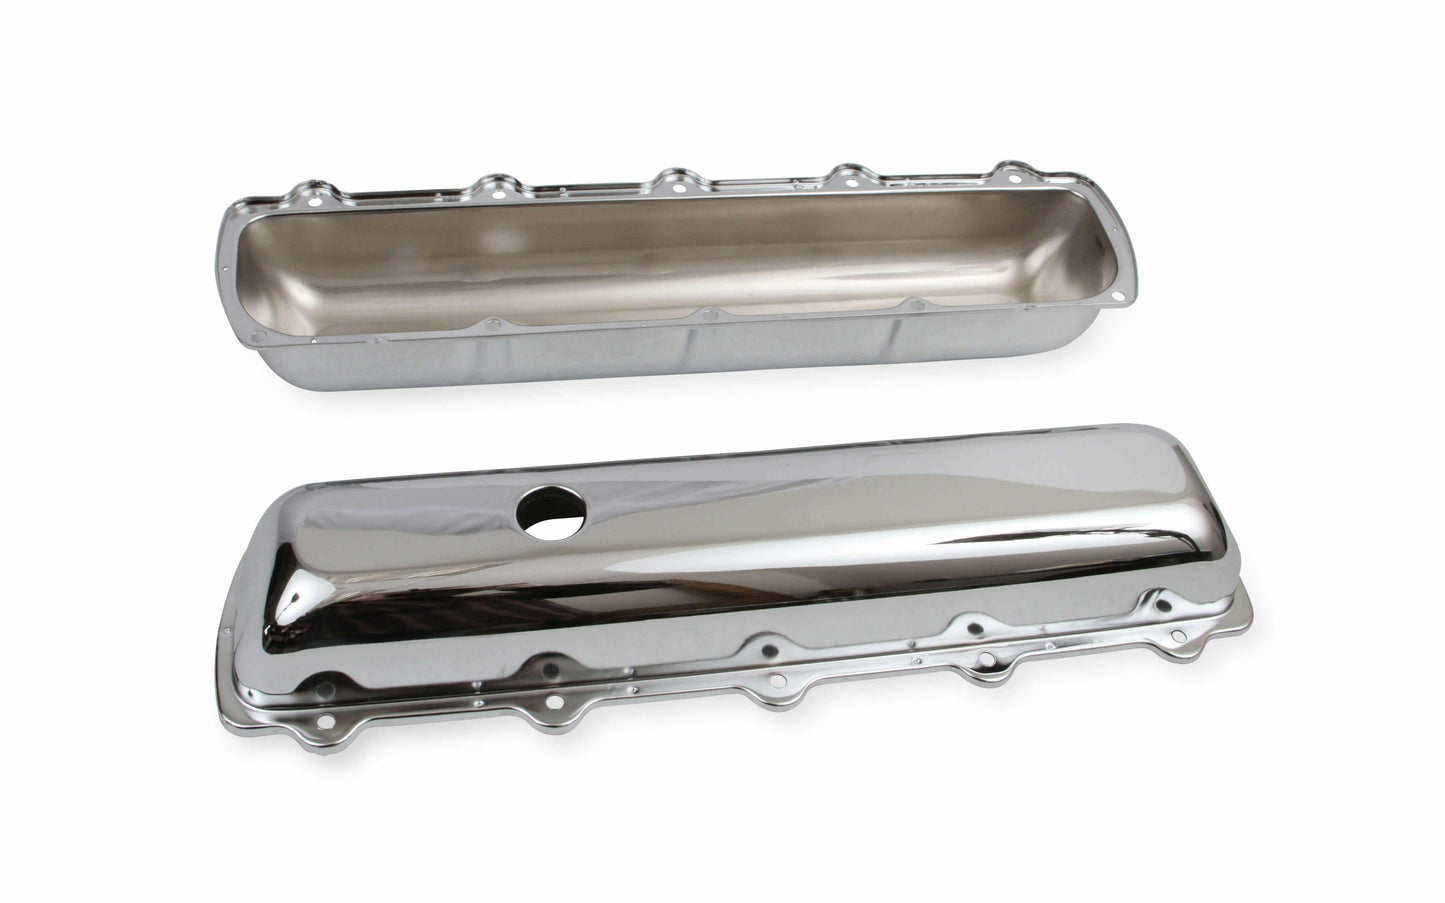 Mr. Gasket Chrome Valve Covers without Baffle - 9422